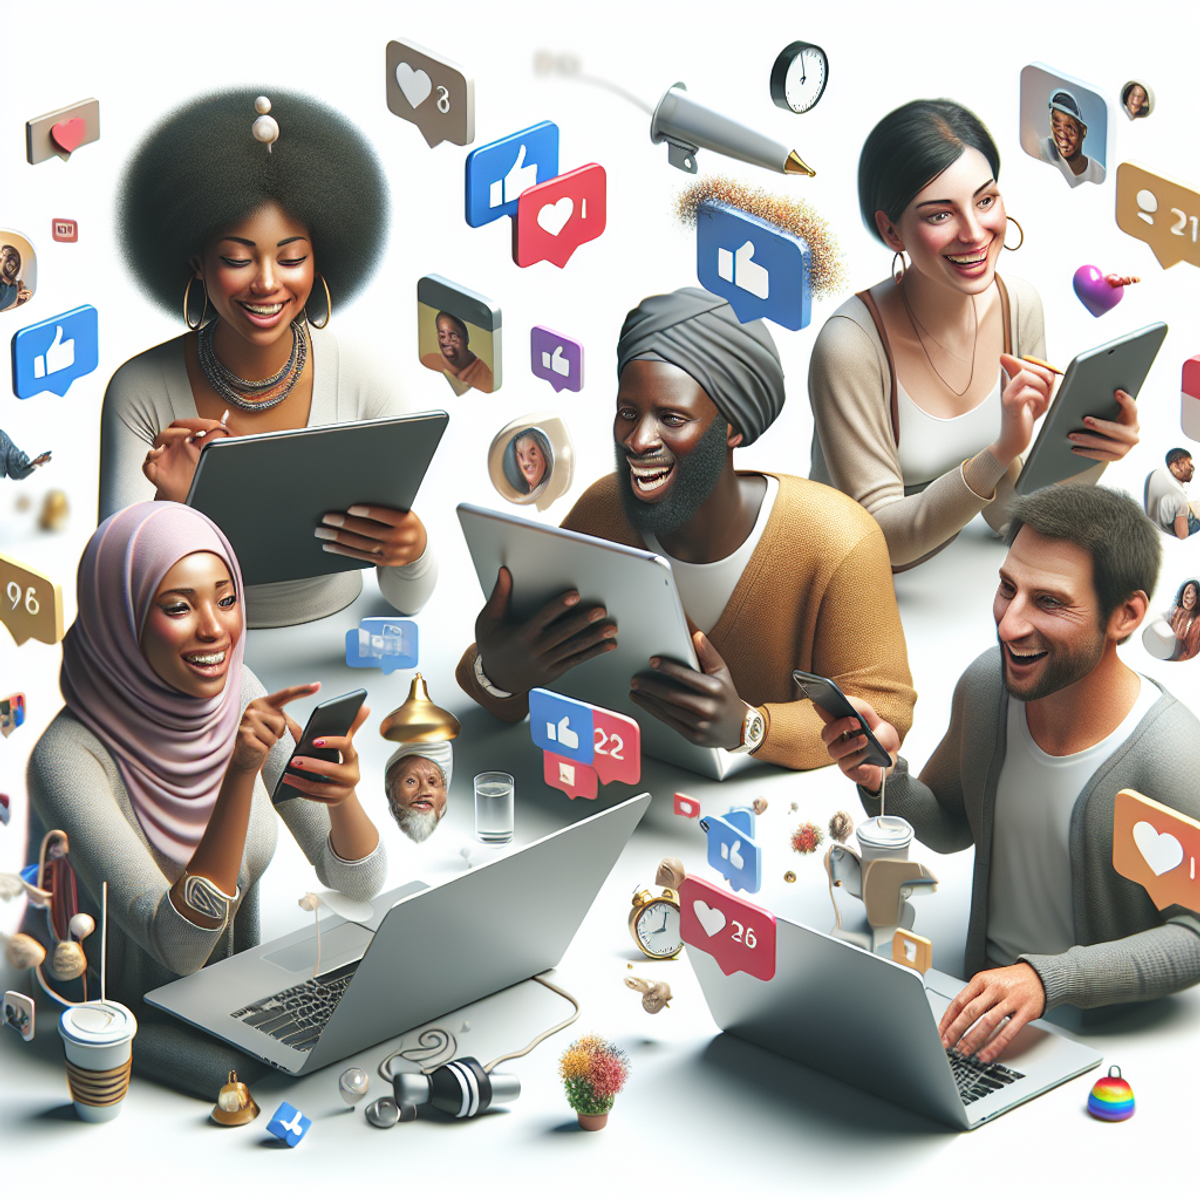 A Caucasian woman on a tablet, an African man on a smartphone, a Hispanic woman on a laptop, and a Middle-Eastern man on a desktop computer are engrossed in social media interactions. They express joy, surprise, and excitement while like and share icons, notification bells, and friend requests float around them.